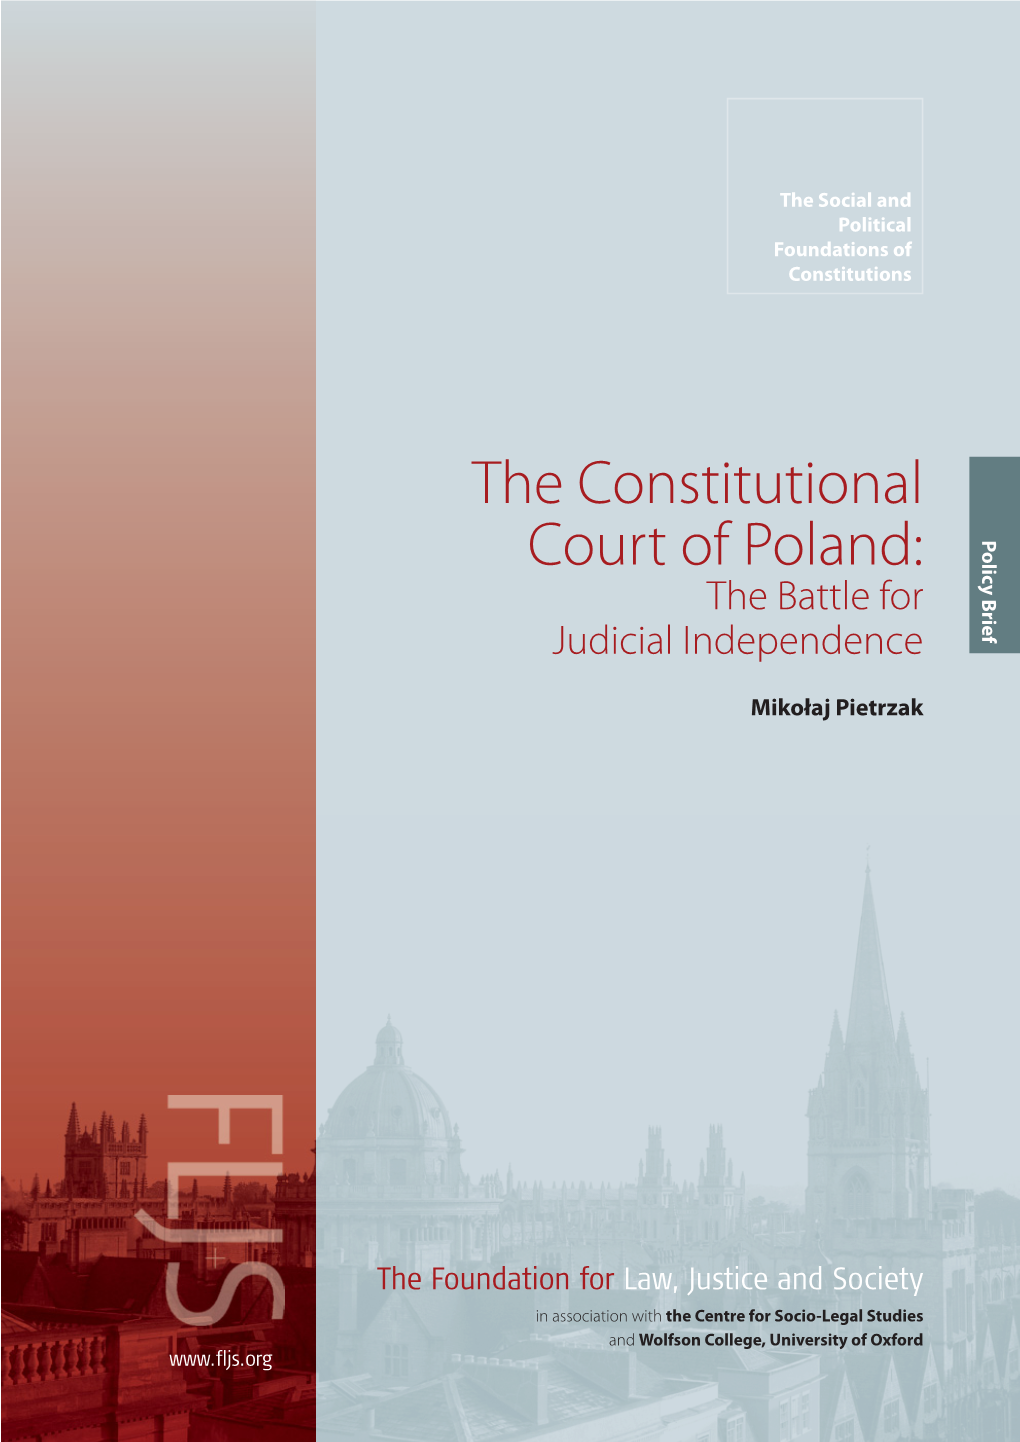 The Constitutional Court of Poland: Policy Brief the Battle for Judicial Independence